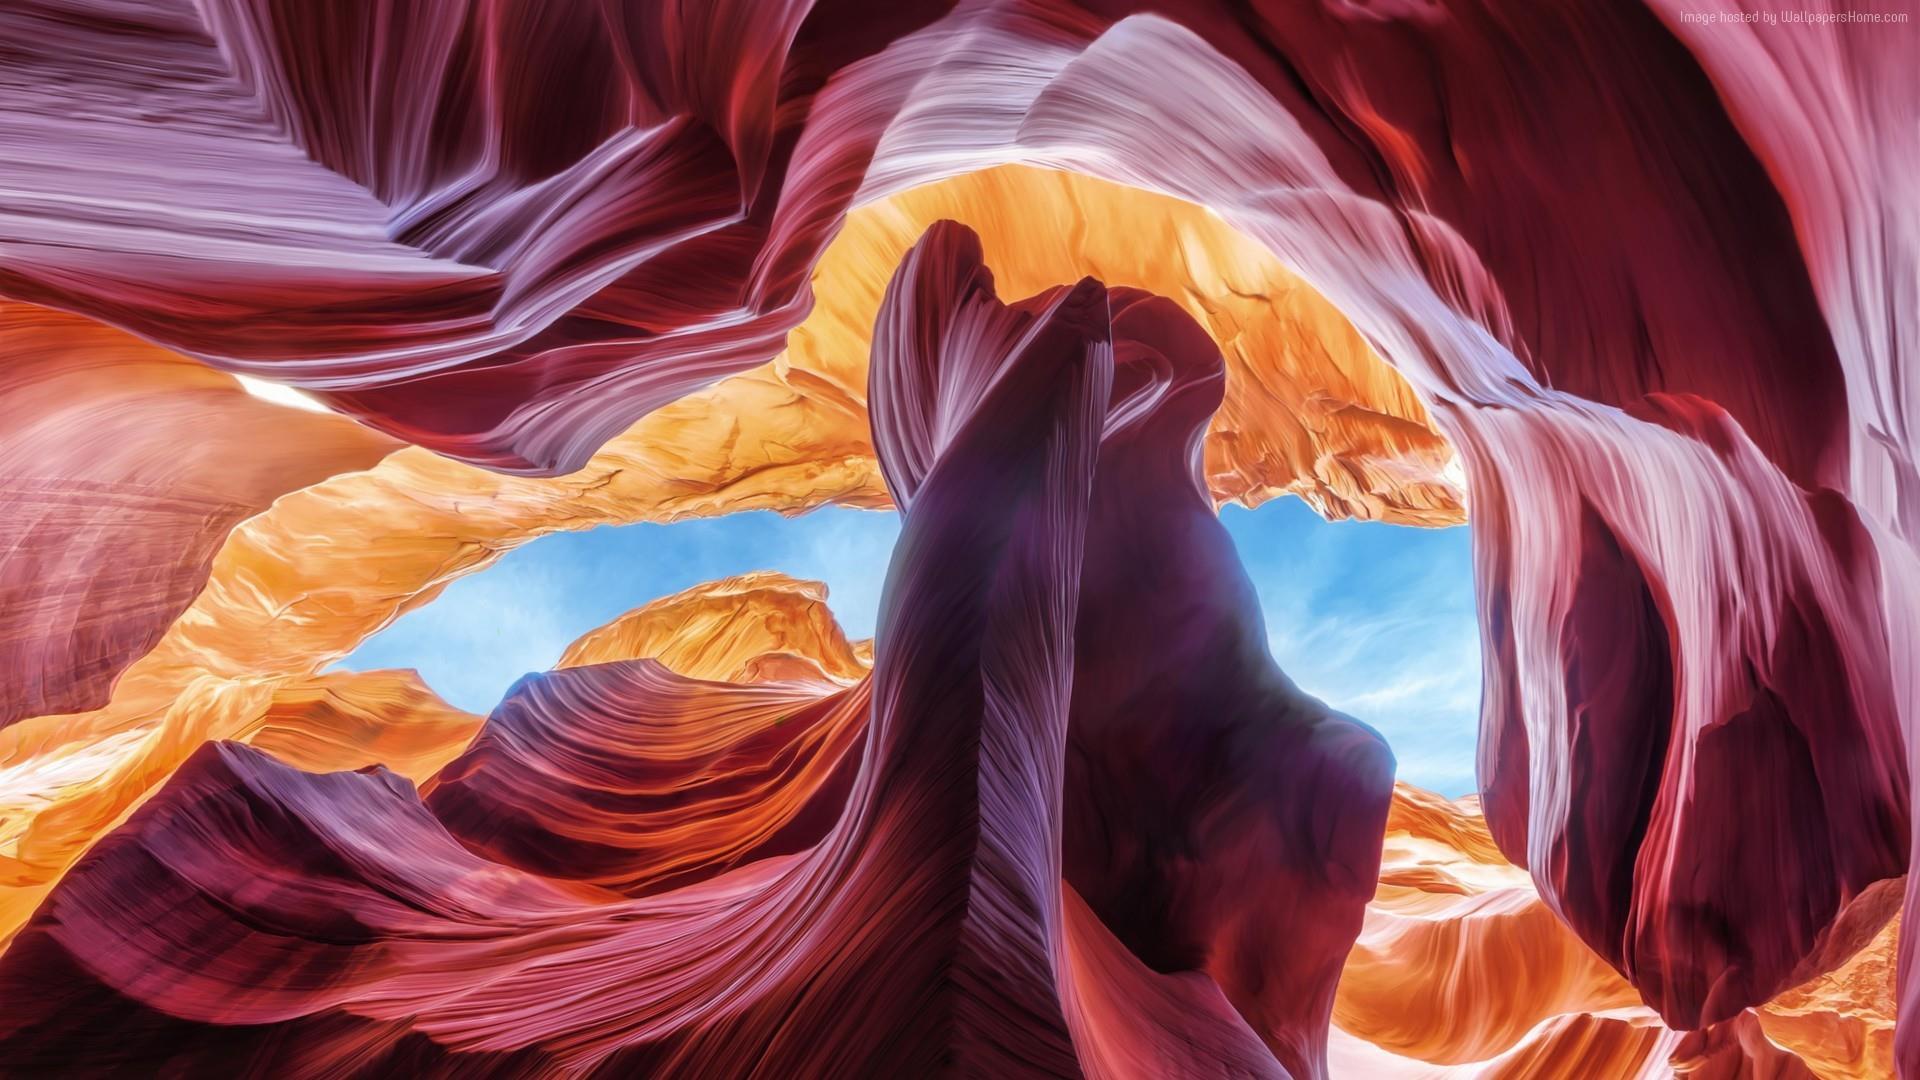 Antelope Canyon Rock Formations Wallpapers